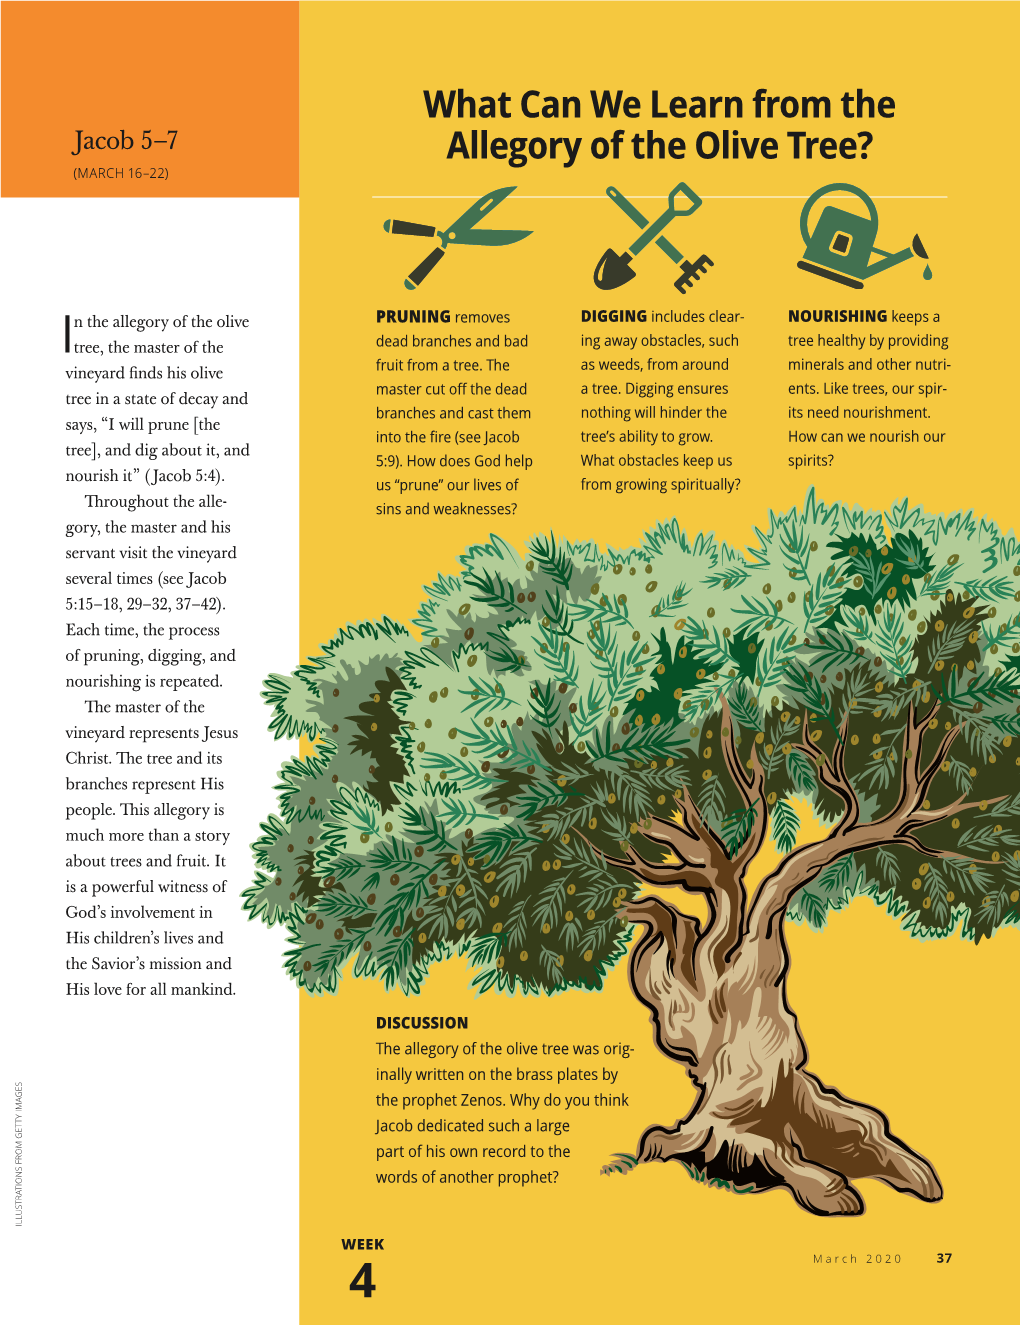 What Can We Learn from the Allegory of the Olive Tree?